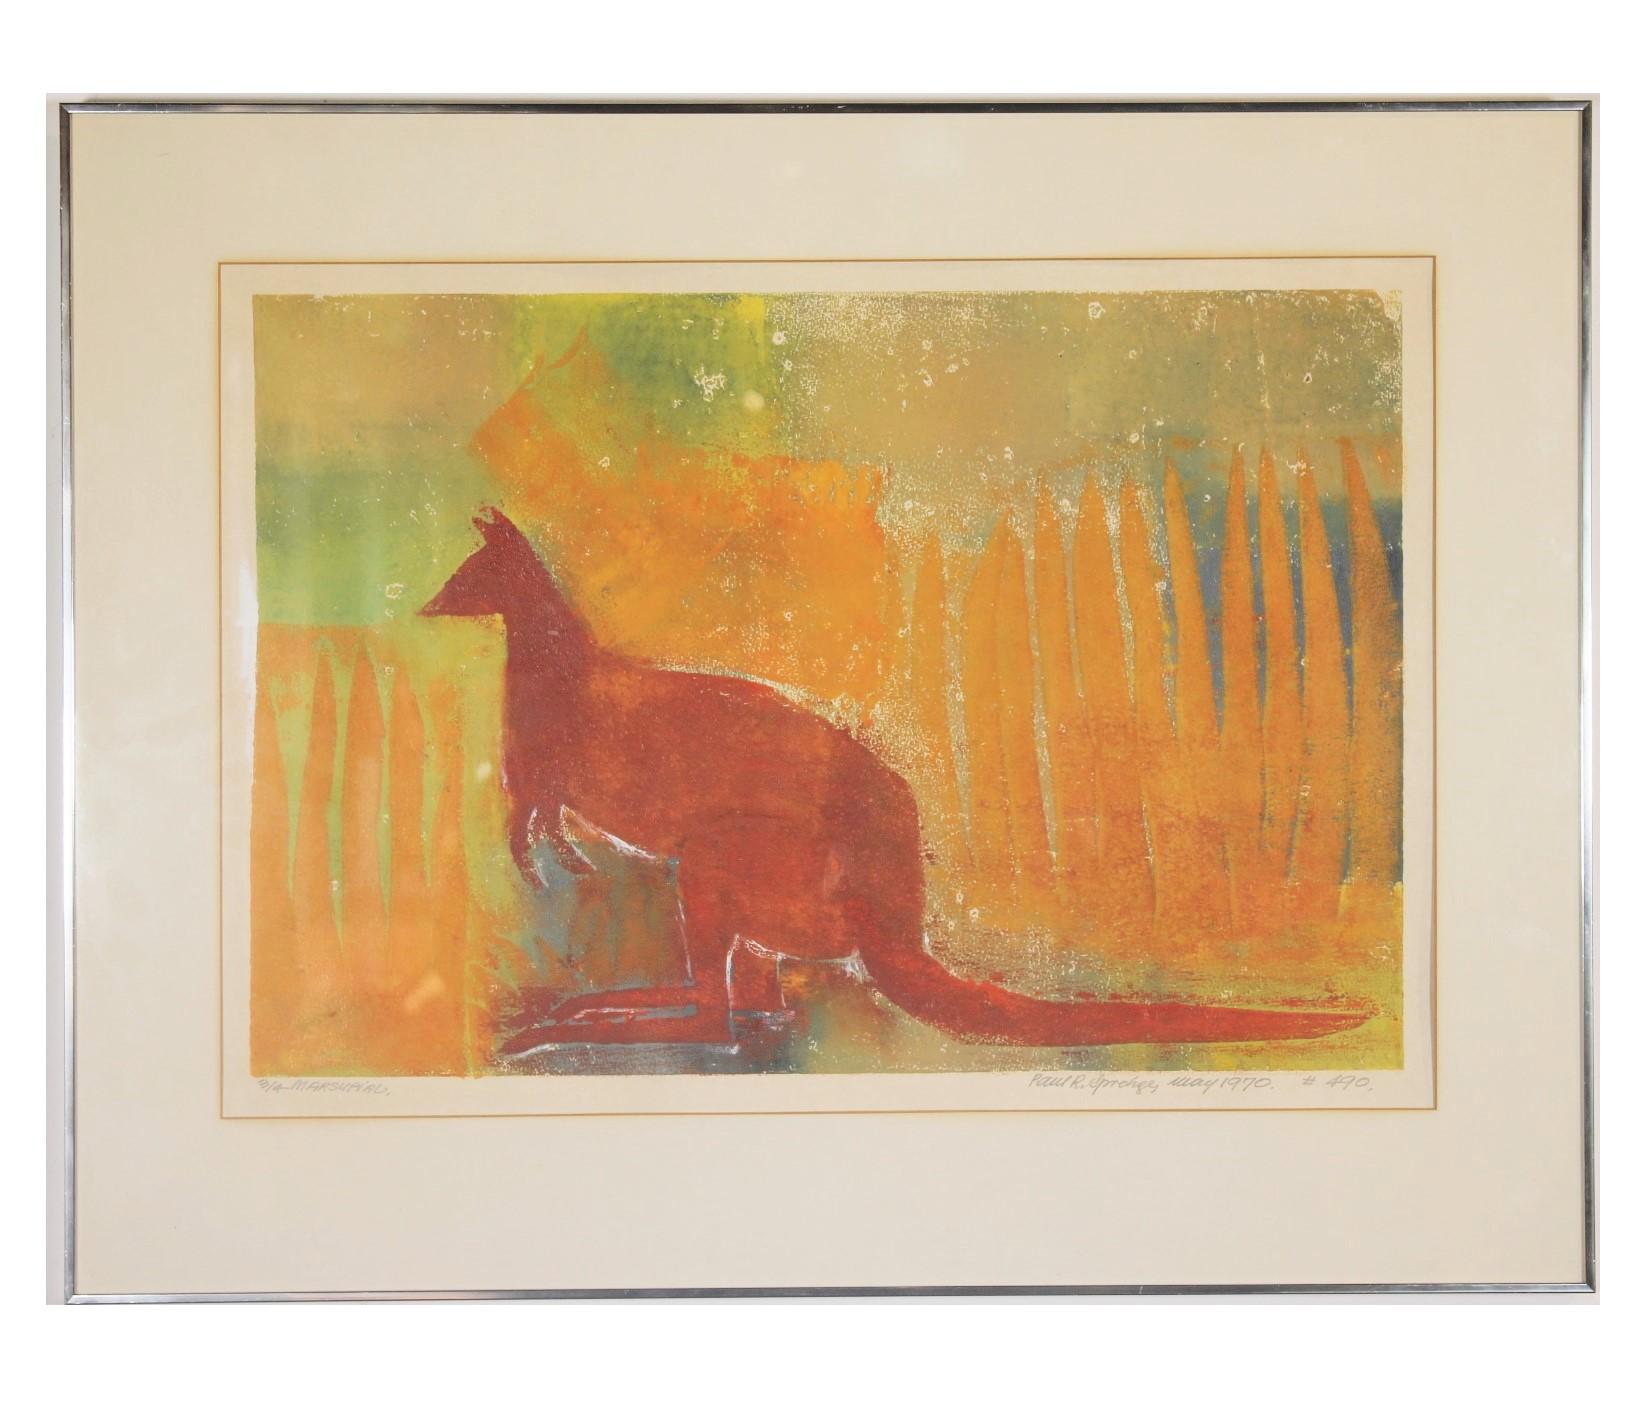 Paul Sprohge Abstract Print - "Marsupial" Abstract Impressionist Lithograph of a Kangaroo Edition 3 of 4 